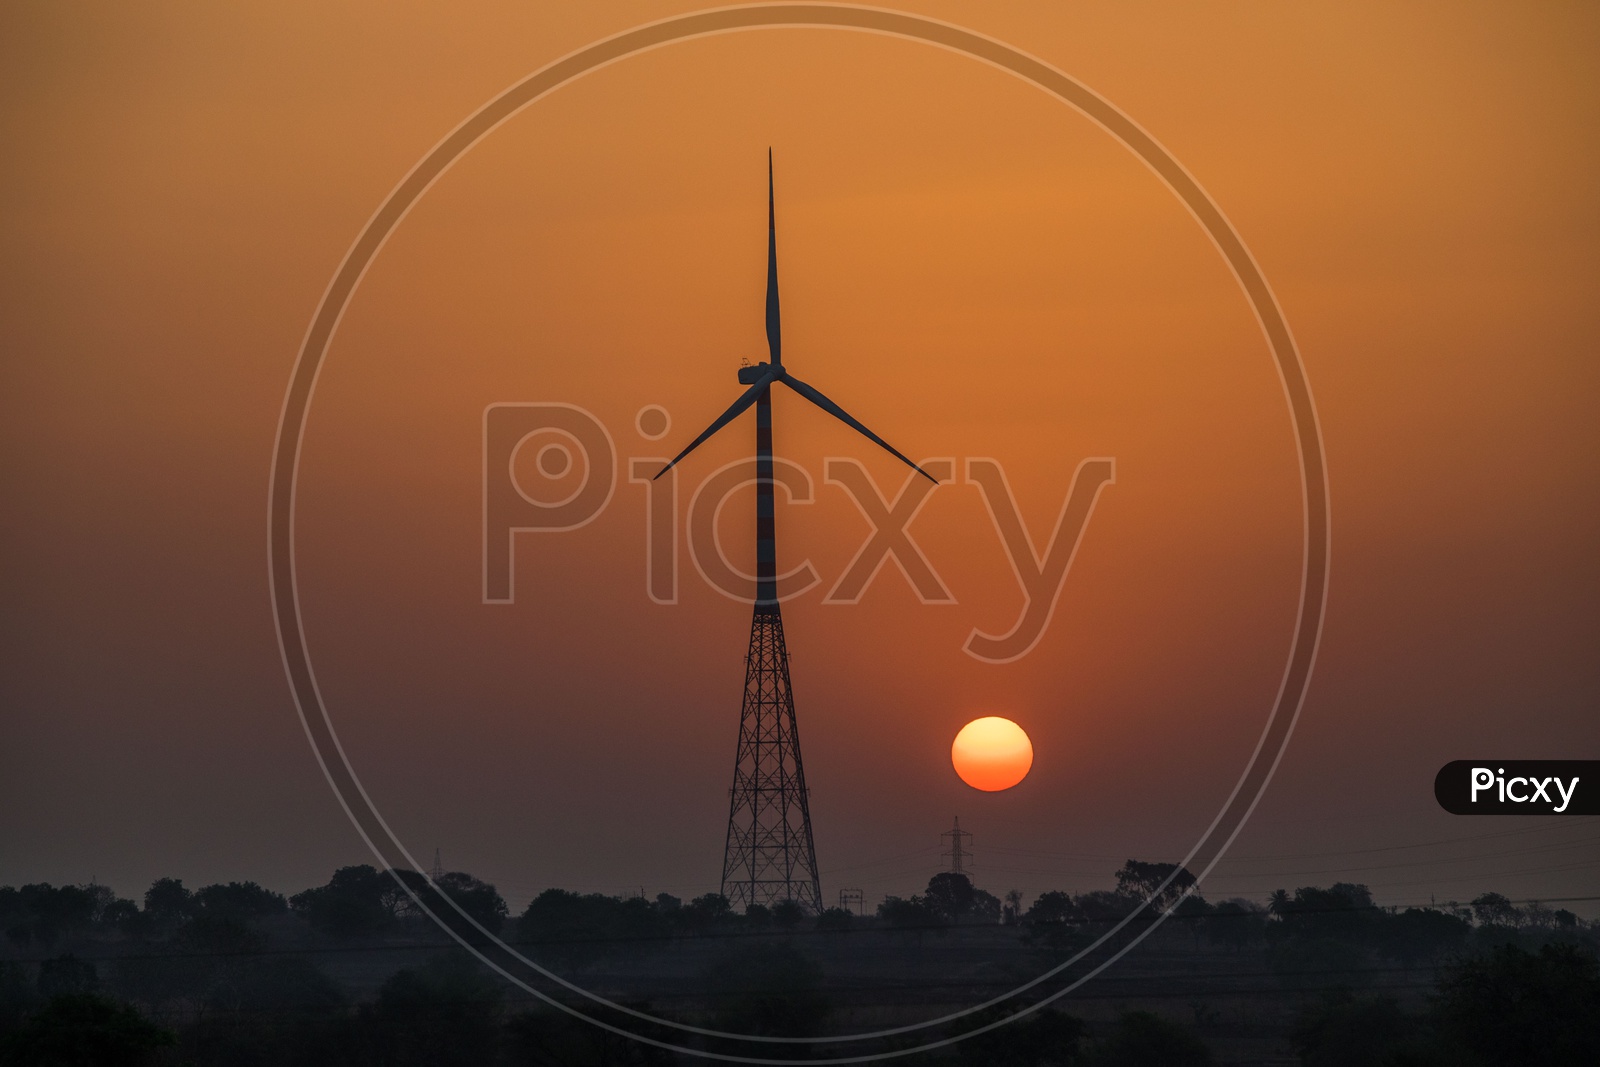 Windmill during the sunrise